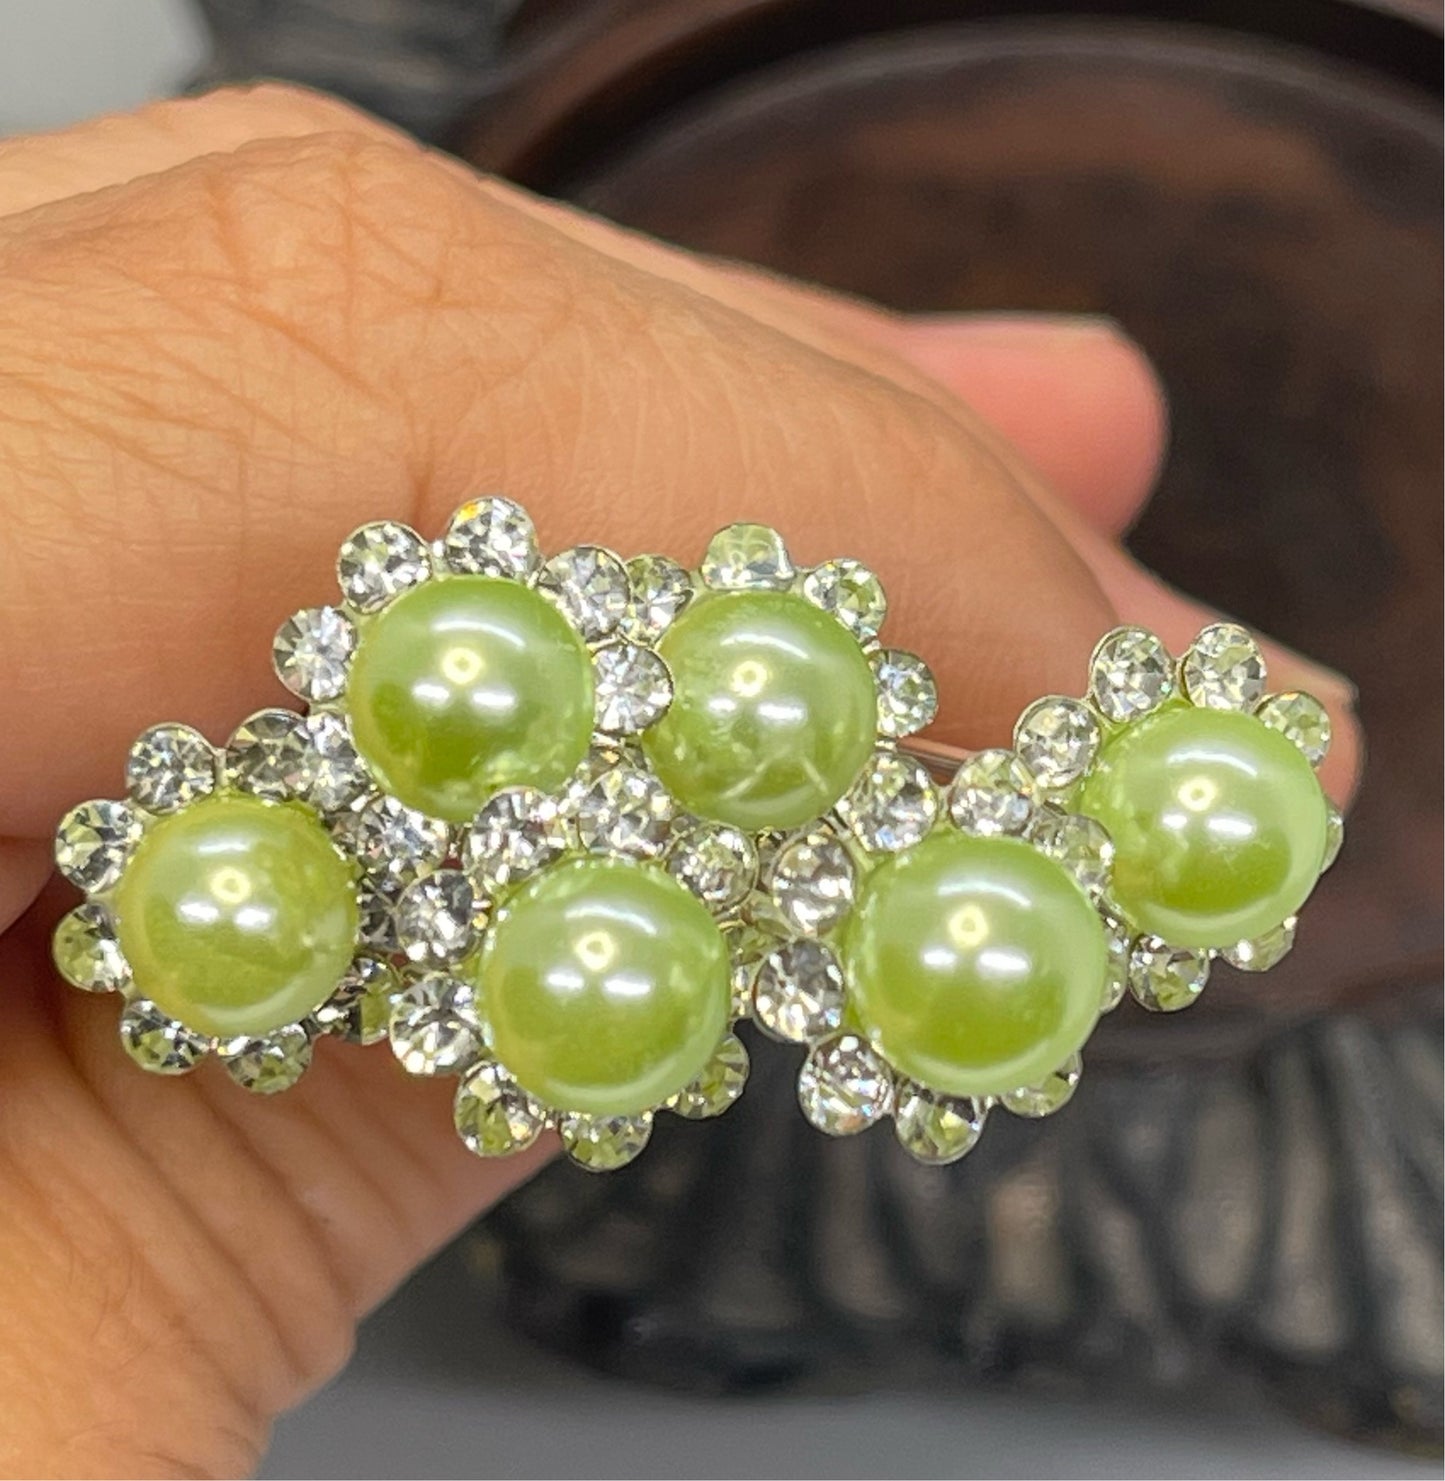 lime green Pearl crystal hair pins 6pc set hair accessory accessories Jewelry hair accessory wedding bridesmaids